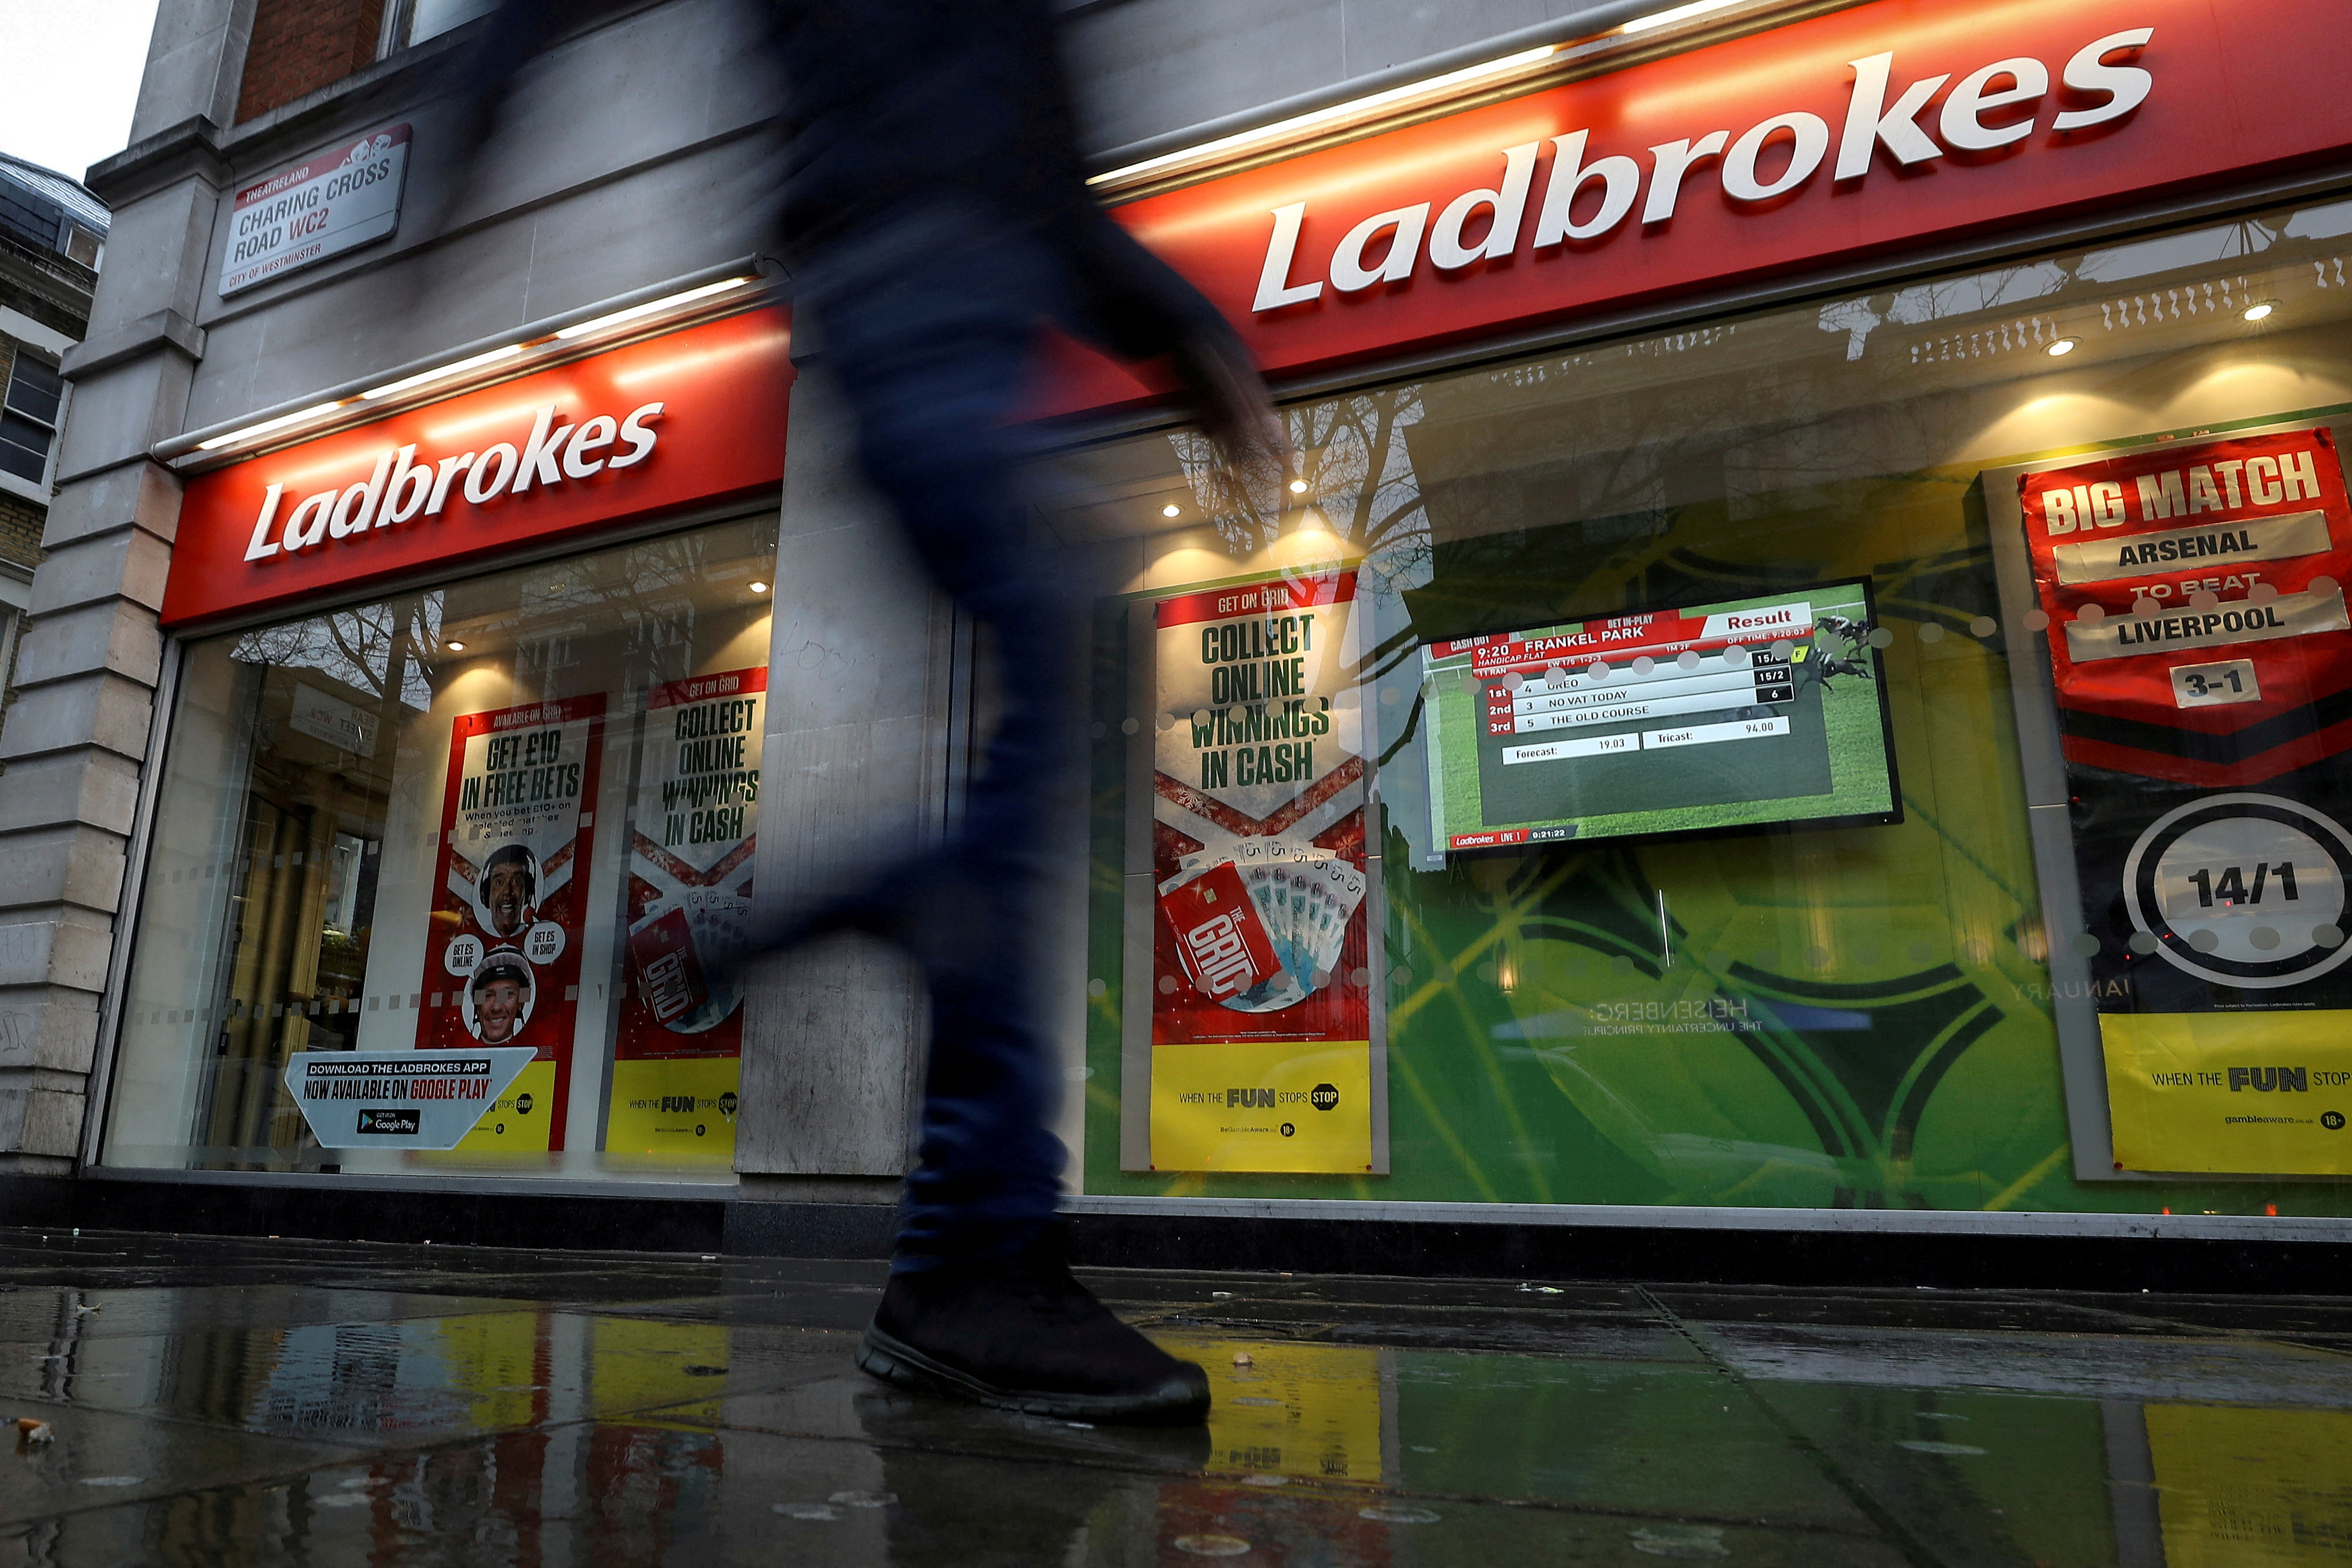 Online betting offers ladbrokes bookmakers forex signal 30 tutorial make-up